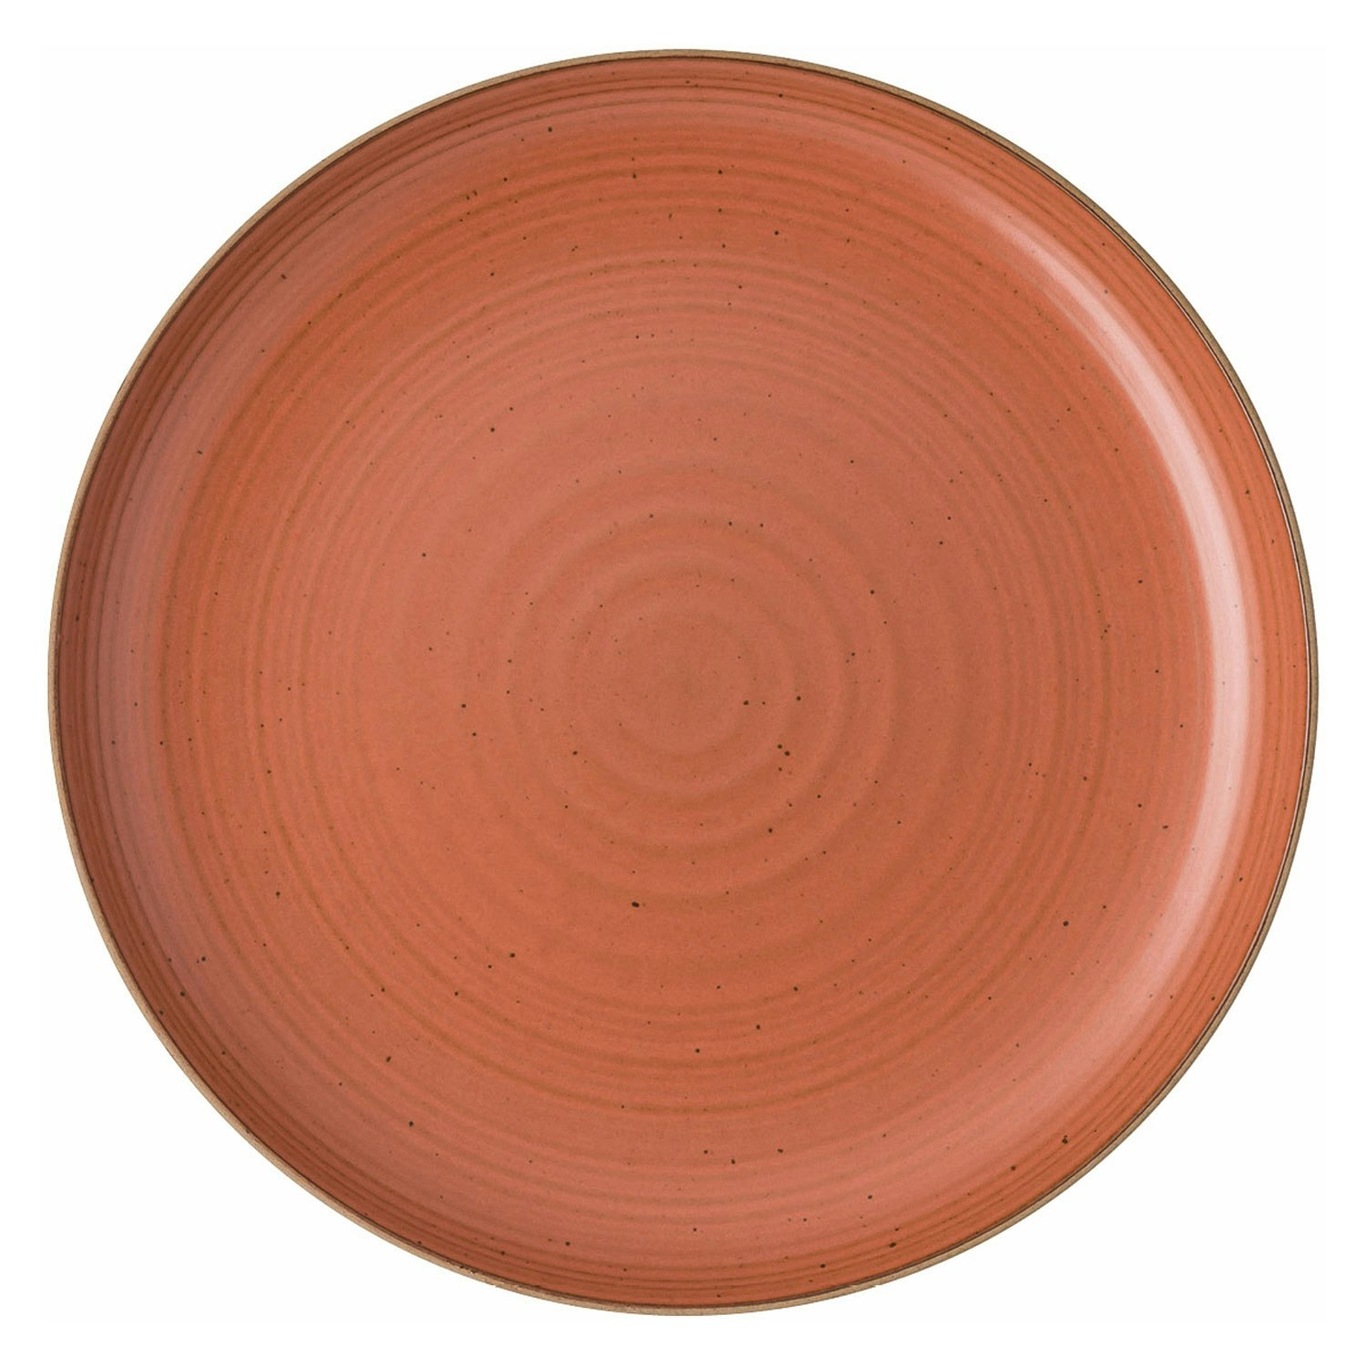 Thomas Nature Plate 27 cm, Coral